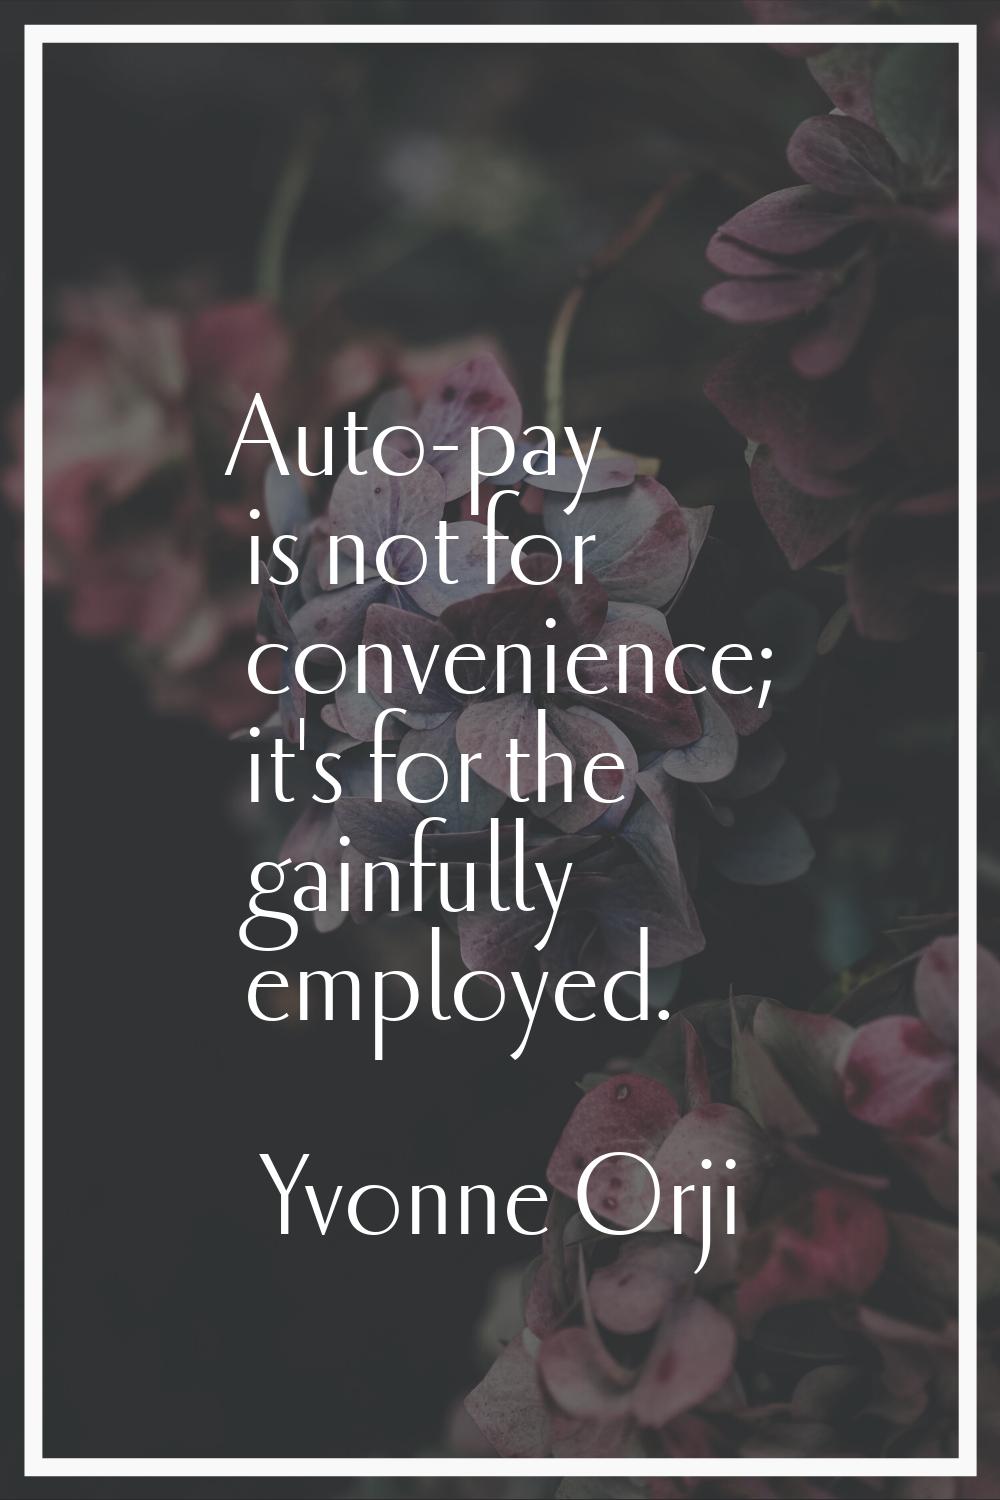 Auto-pay is not for convenience; it's for the gainfully employed.